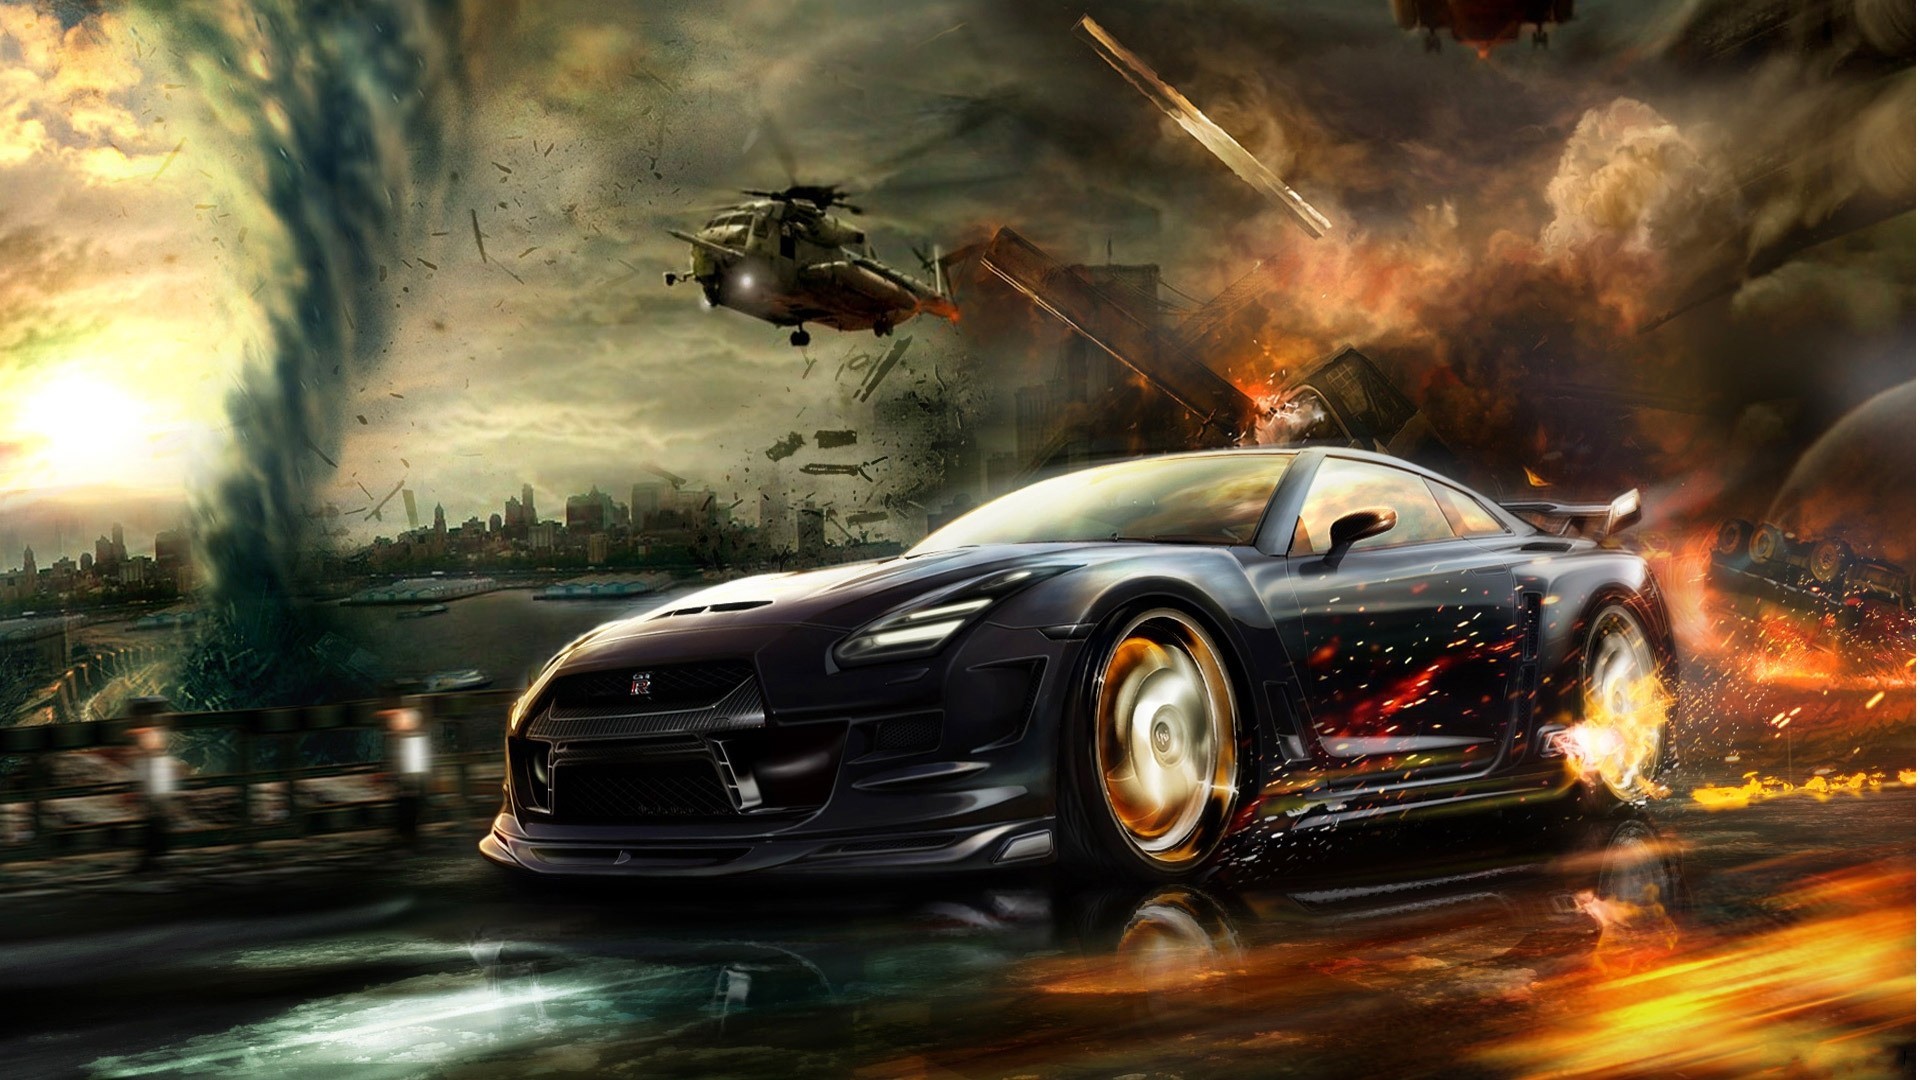 1920x1080  Sports Car fire Backgrounds Wallpapers With Resolutions  1920Ã—1080 .